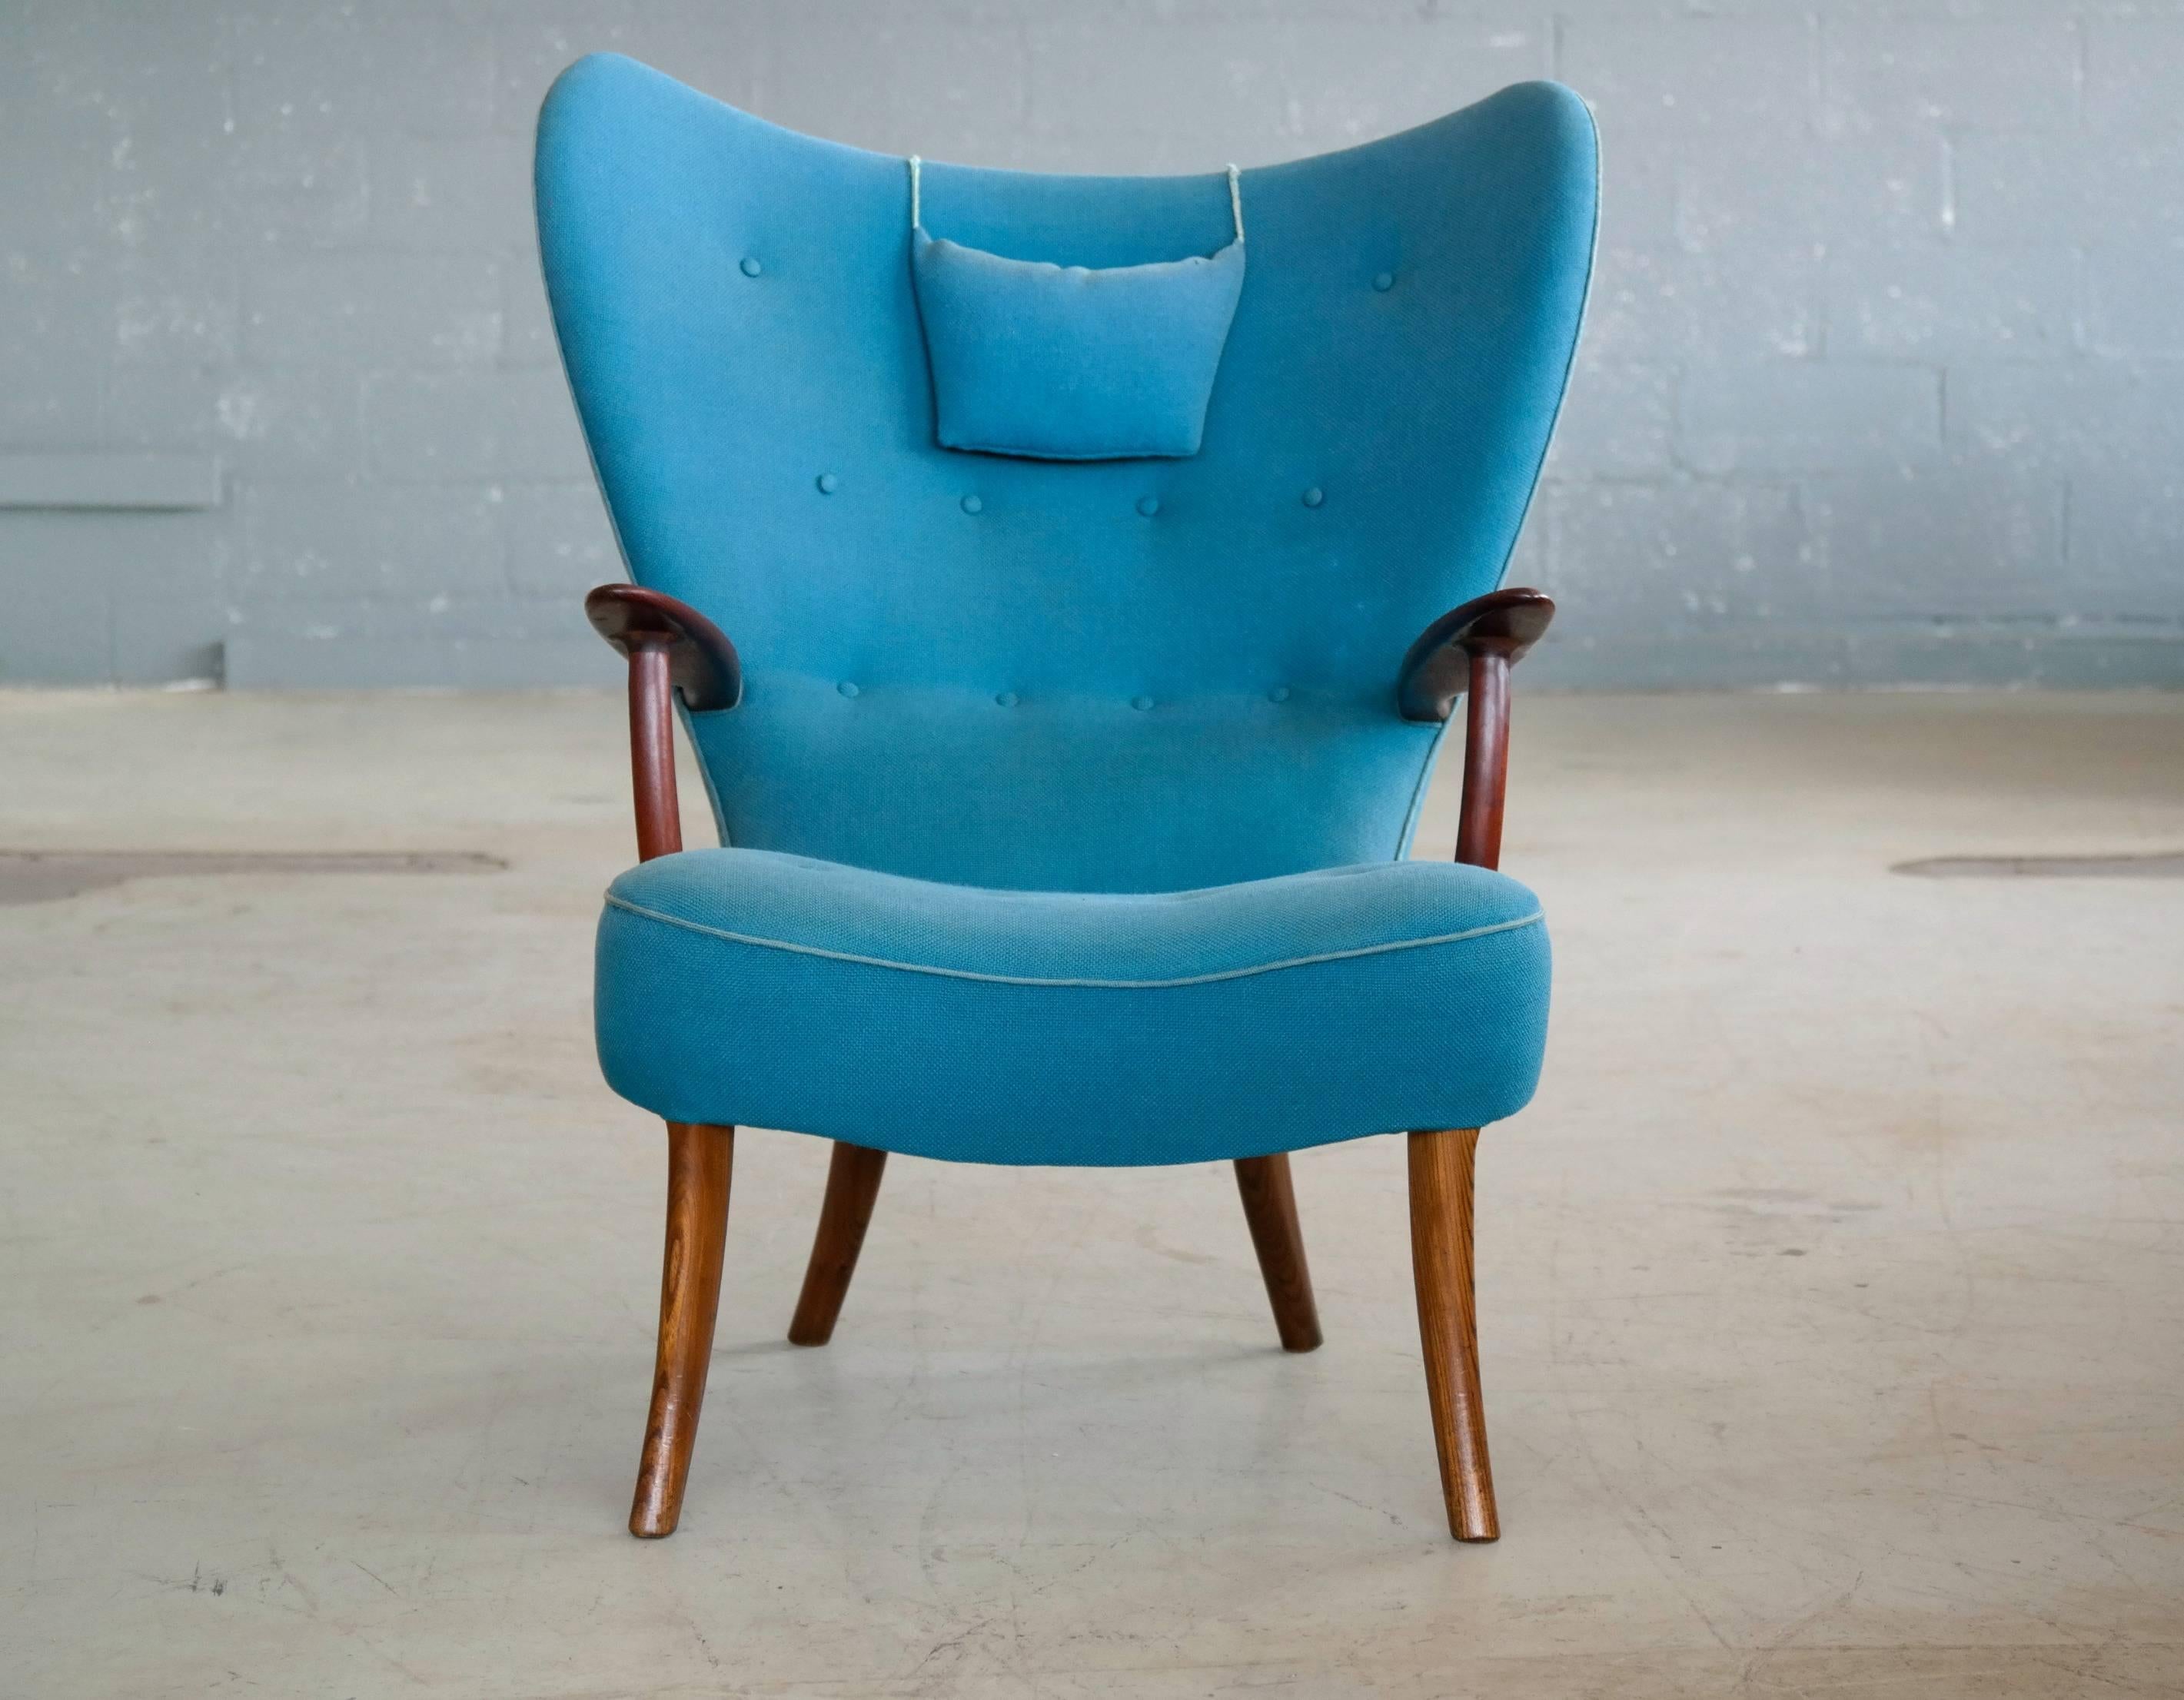 One of the most sublime lounge chairs to come out the Danish midcentury era the model Pragh designed by Ib Madsen and Acton Schubell in the early 1950s for their own company Madsen and Schubell Madsen located just north of Copenhagen. A very